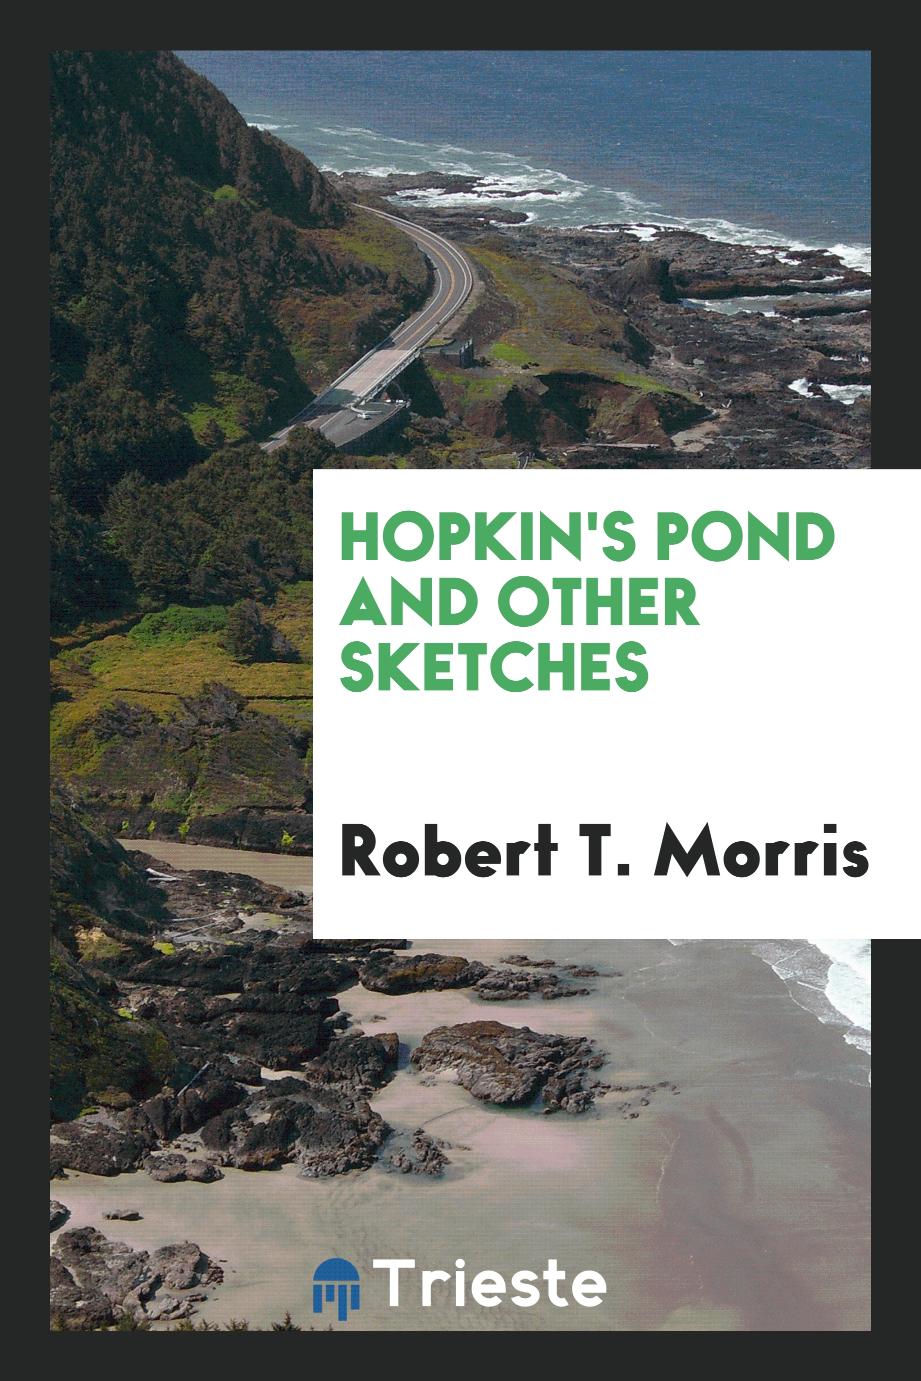 Hopkin's pond and other sketches